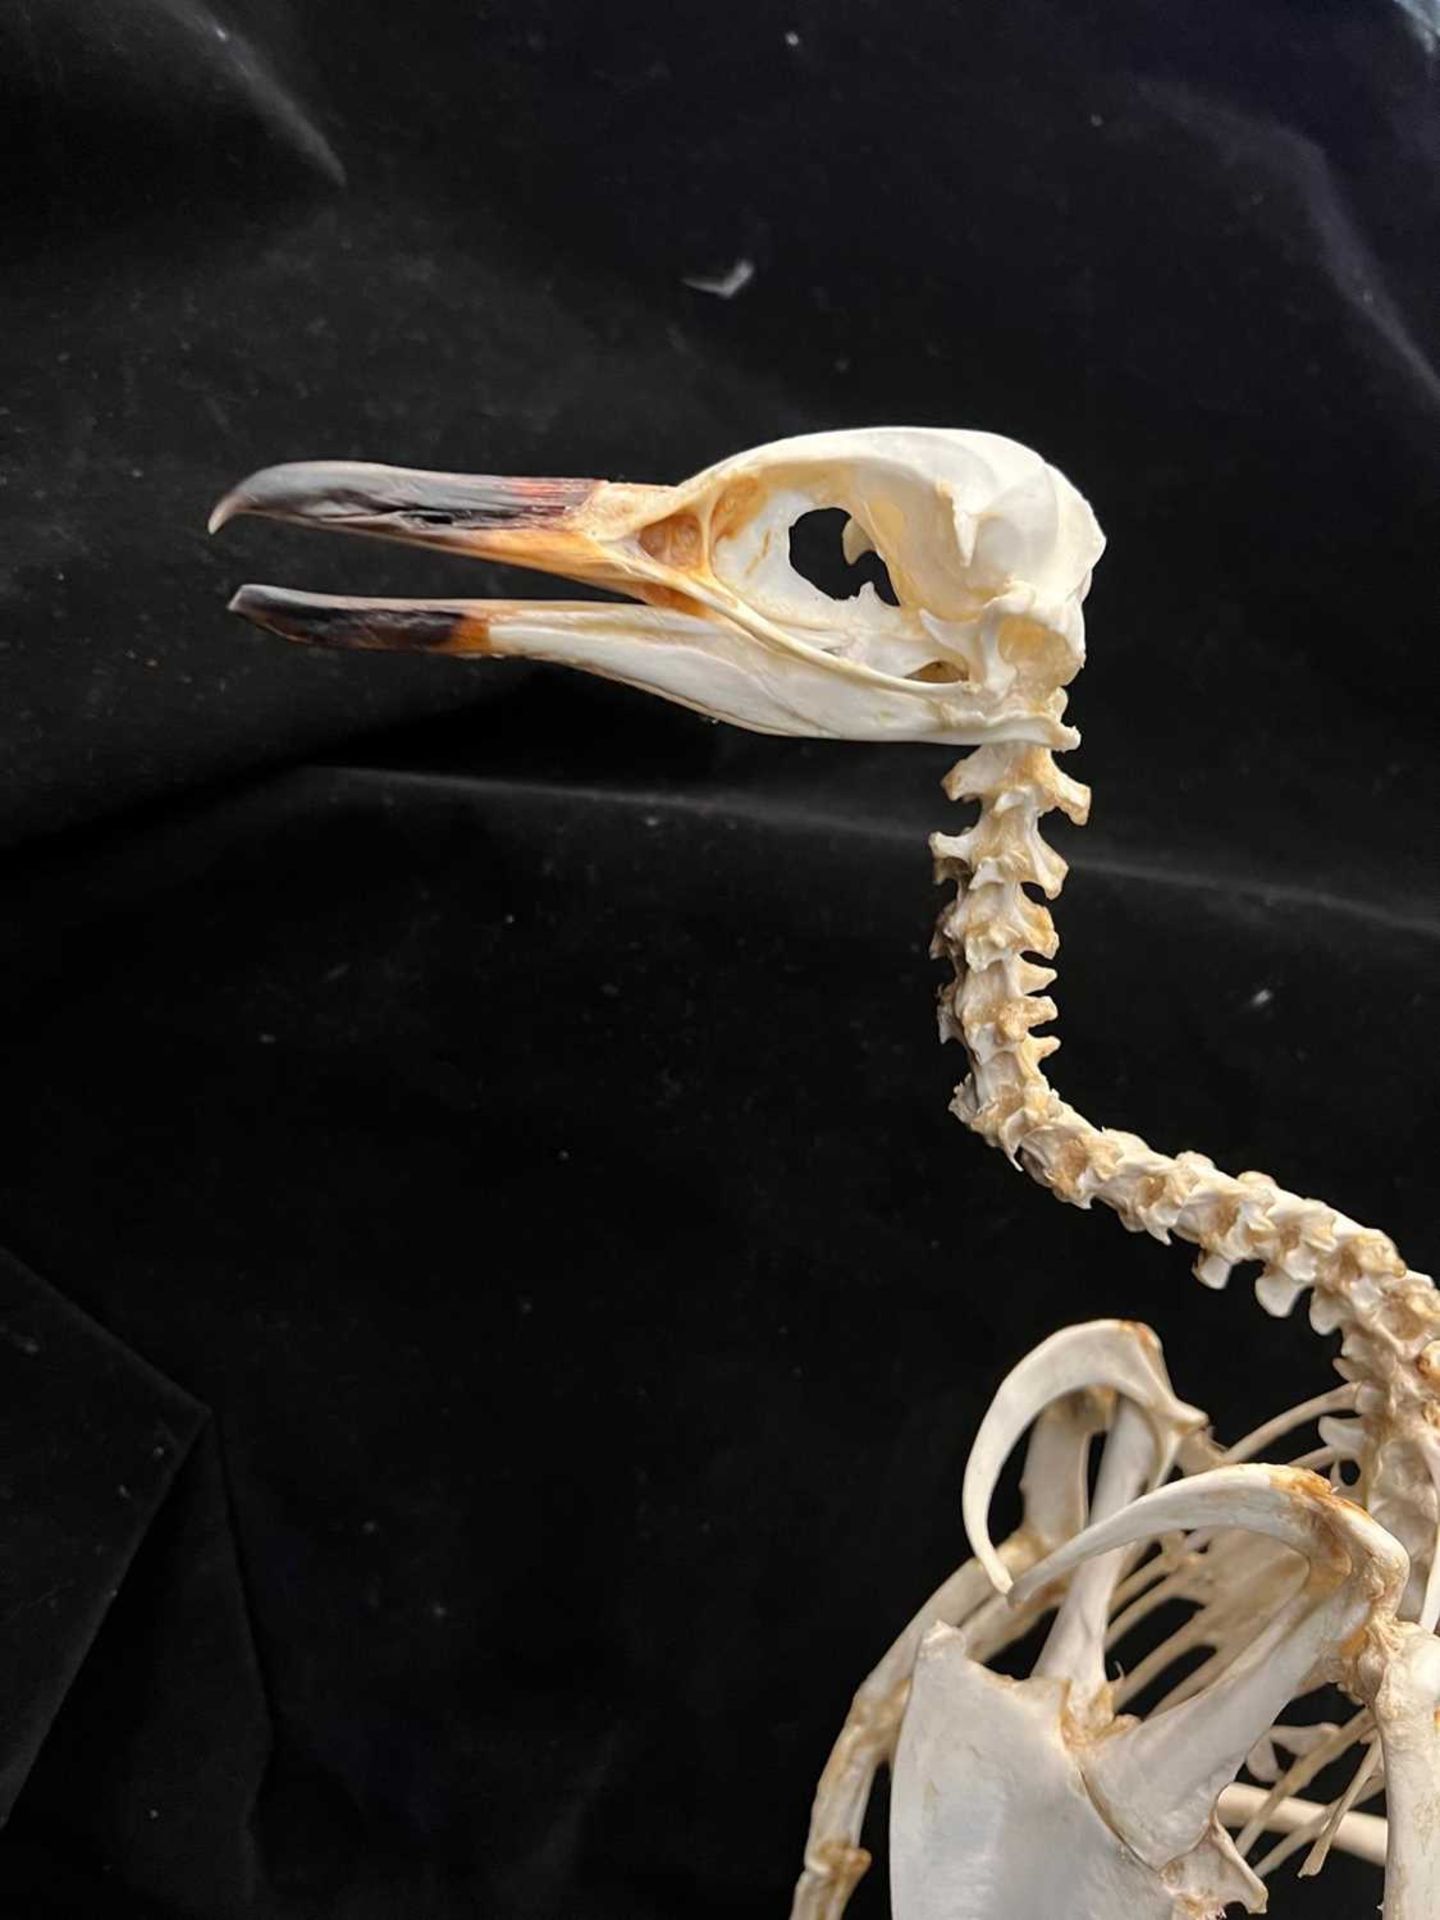 A TAXIDERMY / OSTEOLOGY PENGUIN SKELETON. - Image 4 of 8